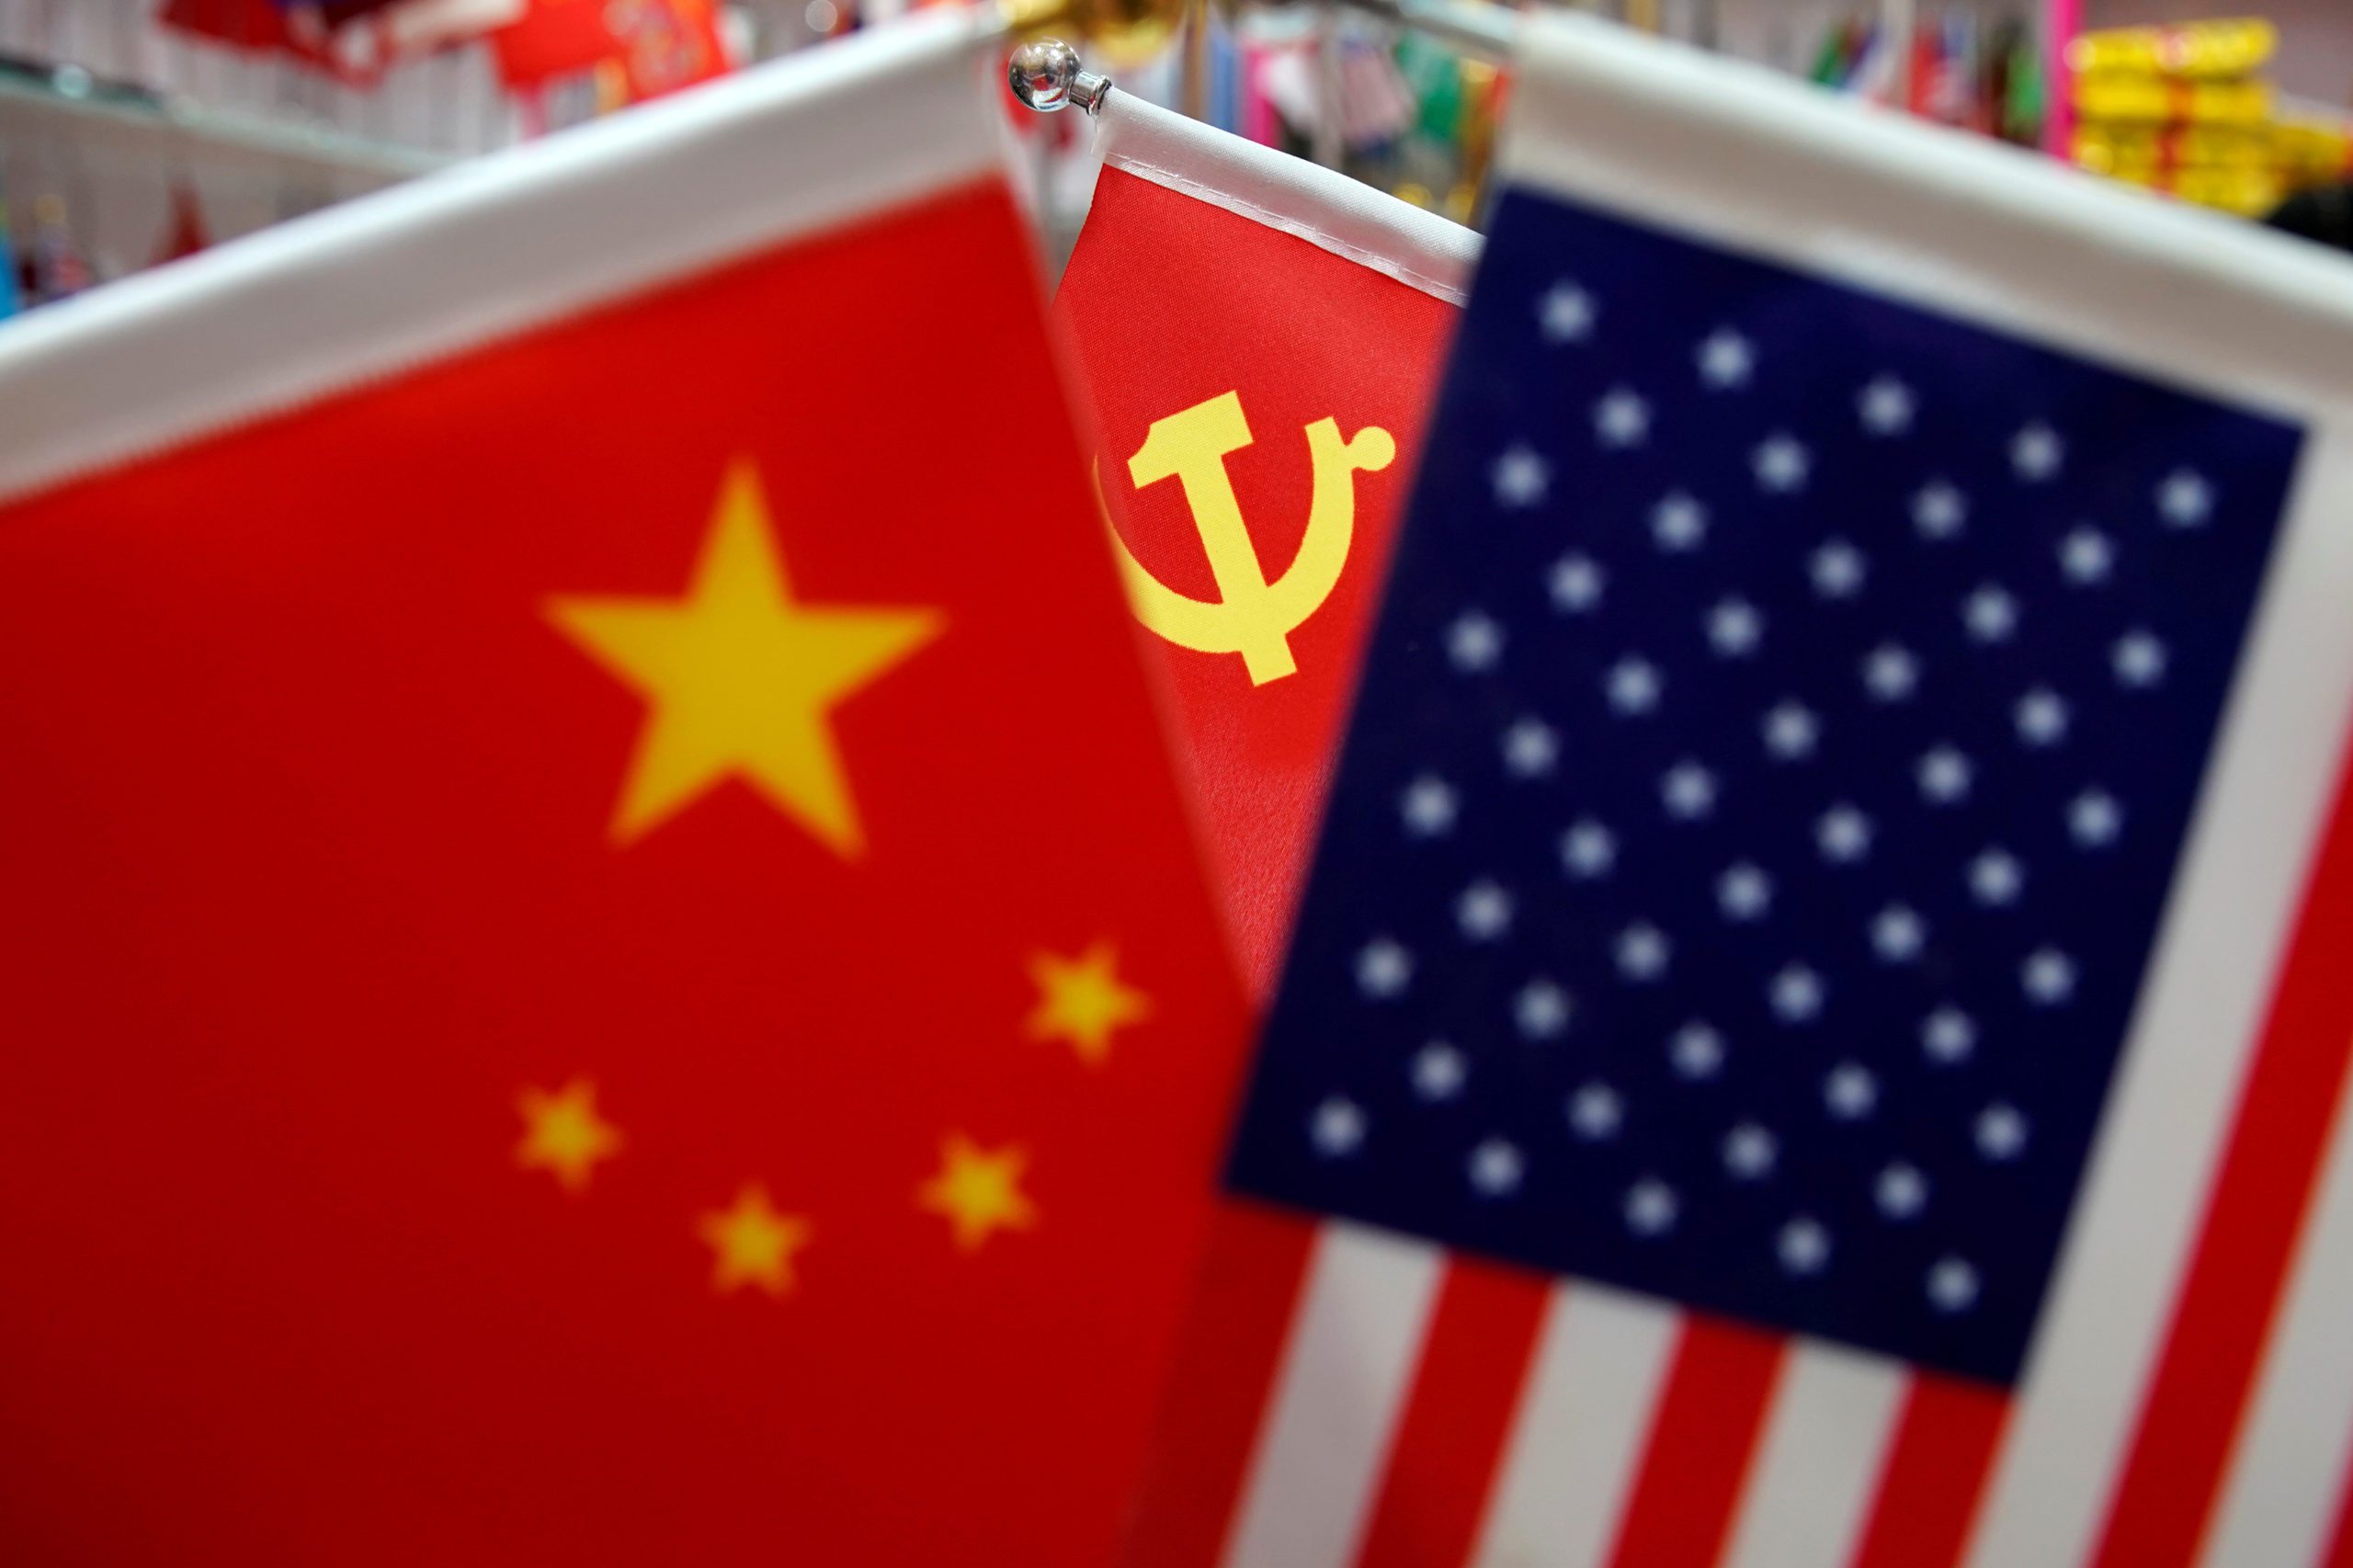 FILE PHOTO: The flags of China, U.S. and the Chinese Communist Party are displayed in a flag stall at the Yiwu Wholesale Market in Yiwu, Zhejiang province, China, May 10, 2019. REUTERS/Aly Song/File Photo - RC2R5K9ZWVNO